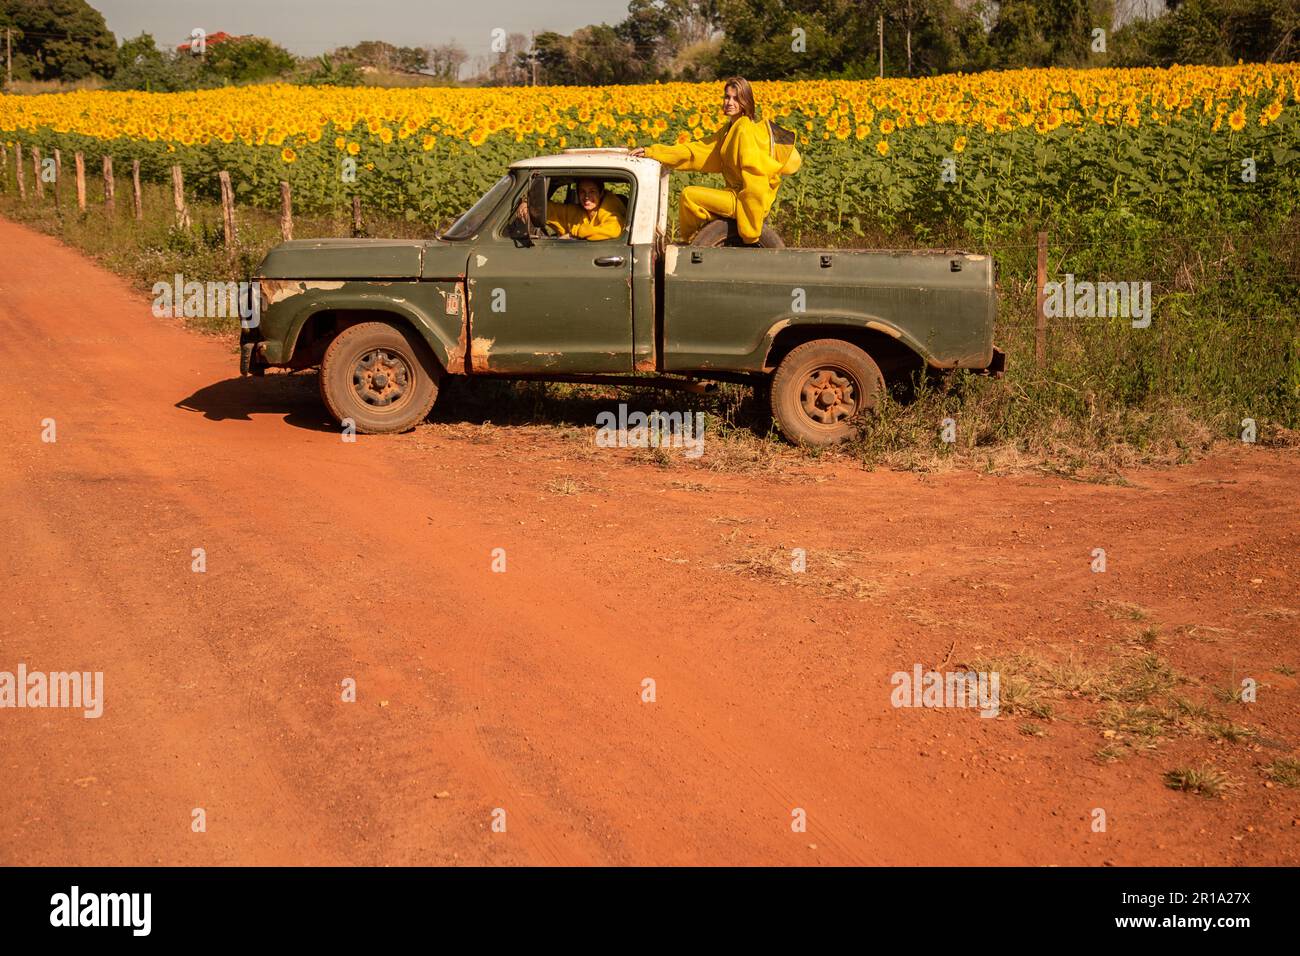 Goiânia, Goias, Brazil – May 11, 2023: Two beekeepers in a pickup truck, parked on a dirt road, visiting a sunflower field. Stock Photo